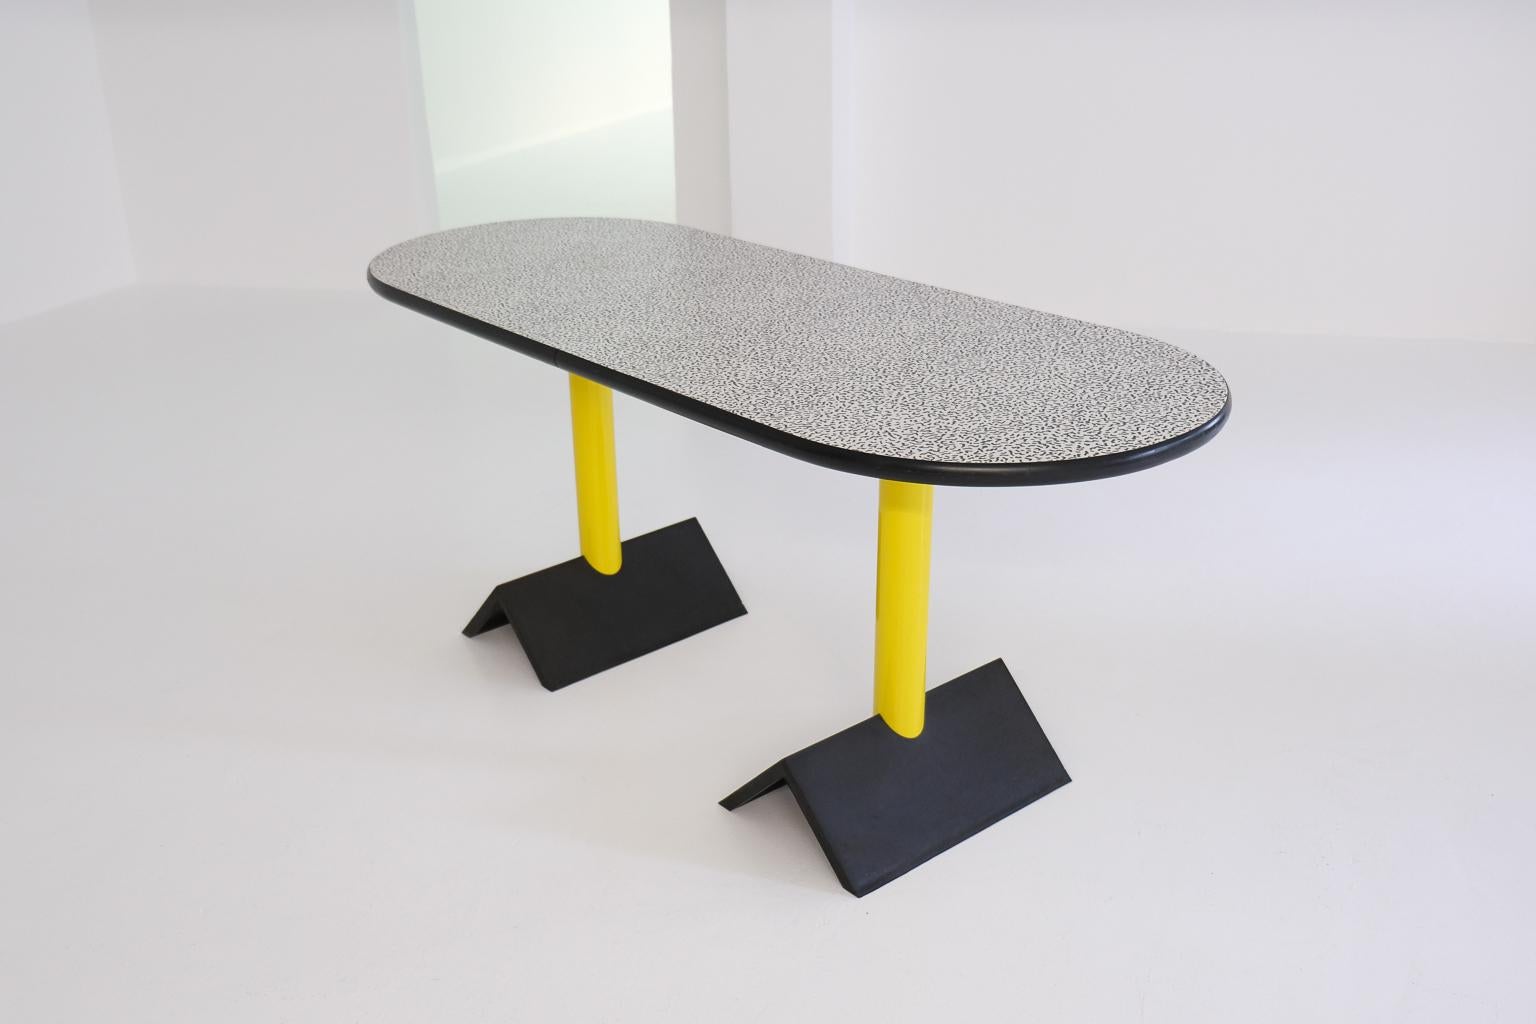 custom made oval dining table or desk, or console table in memphis milano style. the oval top is laminated with the classic memphis squiggle pattern and framed by a semicircular rubber edge. the yellow metal legs are set in cast-iron feet shaped